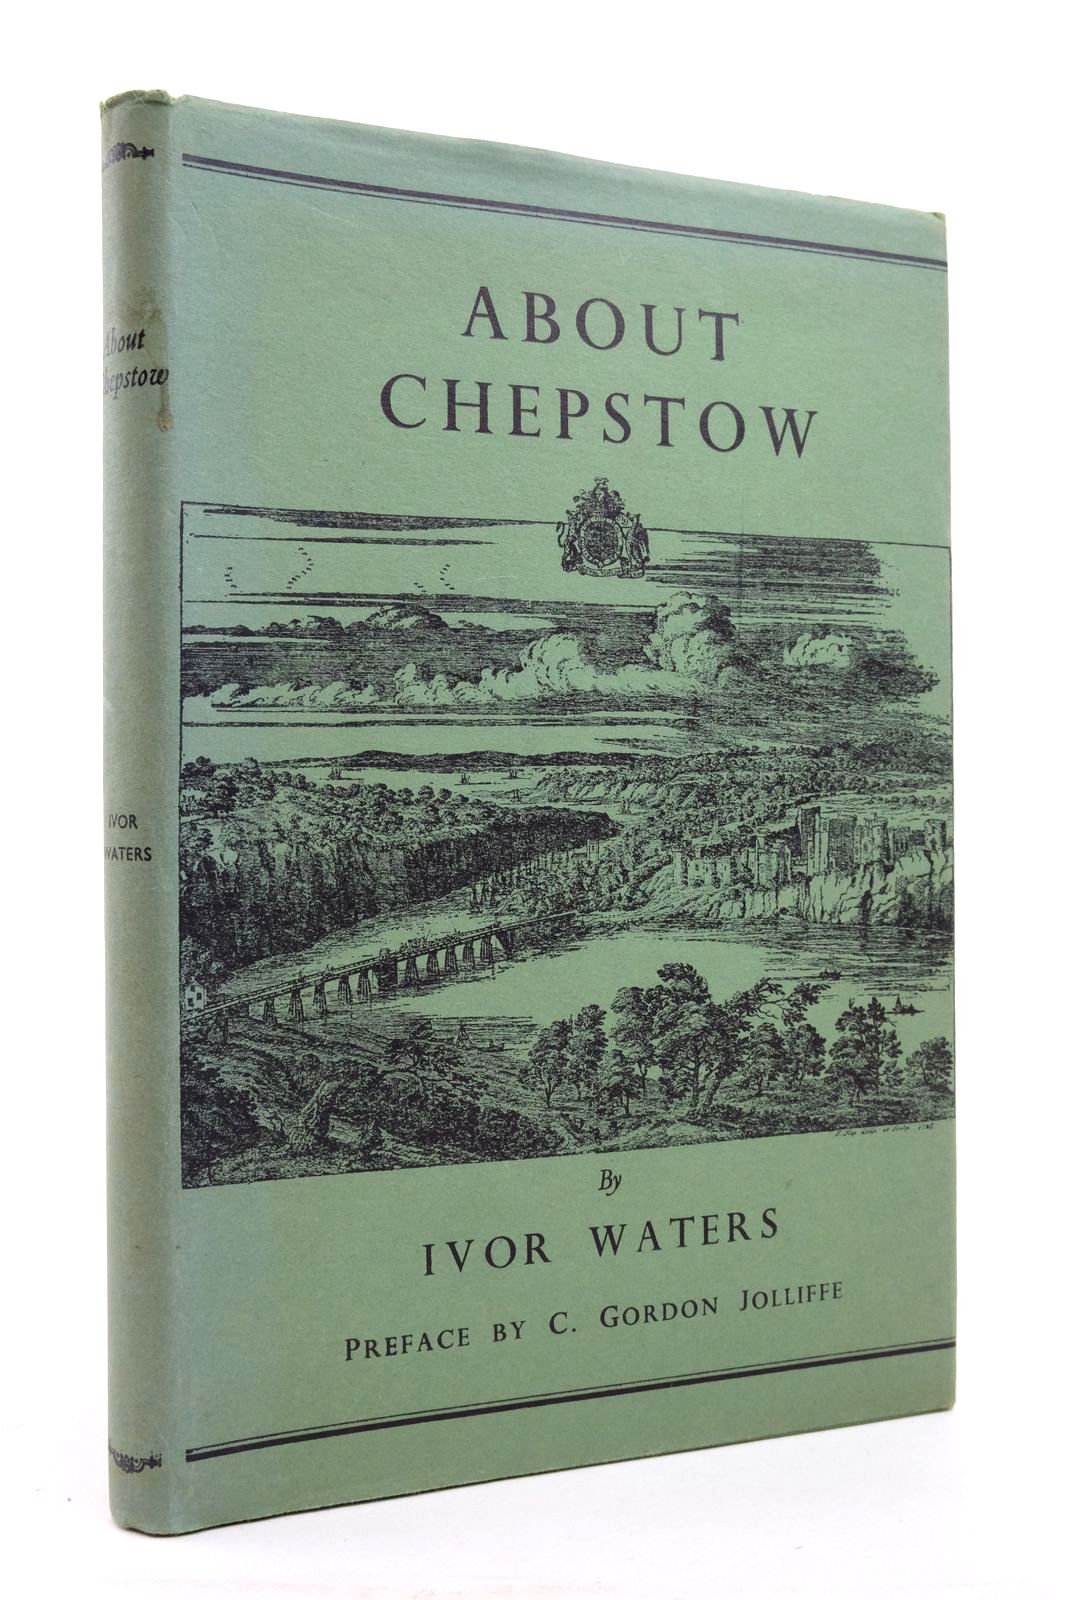 Photo of ABOUT CHEPSTOW written by Waters, Ivor
Jolliffe, C. Gordon illustrated by Waters, Mercedes published by Newport & Monmouthshire Historical Association, The Chepstow Society (STOCK CODE: 2137310)  for sale by Stella & Rose's Books